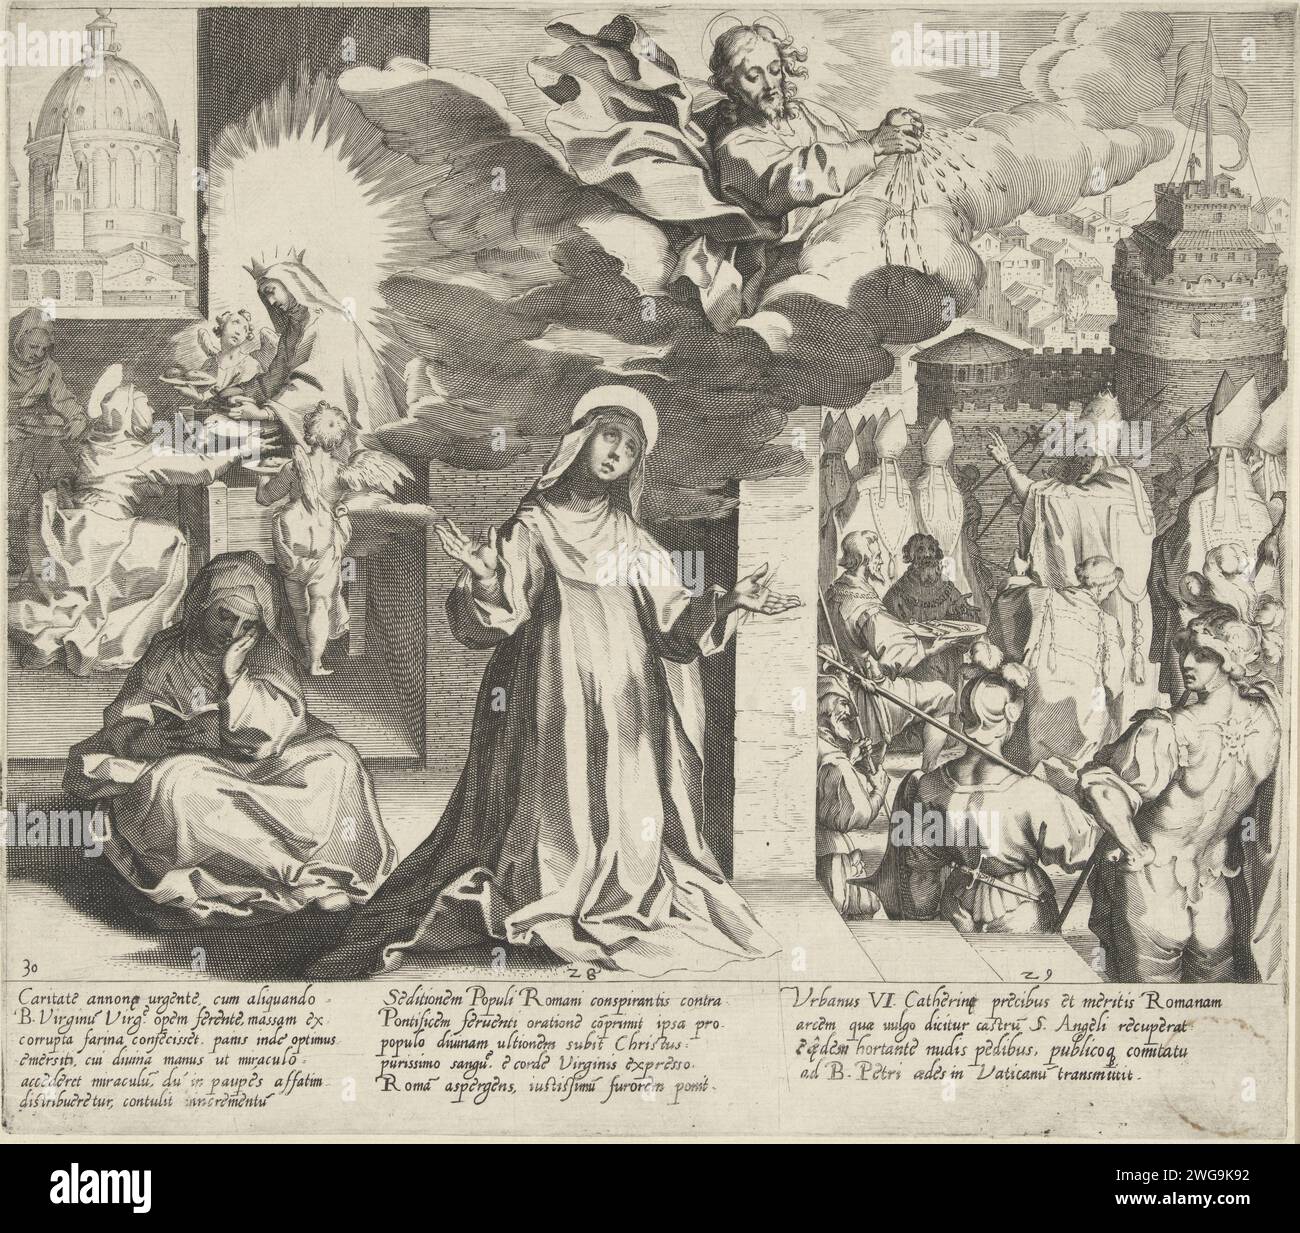 Maria pluses bread that Catharina can hand out on the poor / Christ colander his blood over the city of Rome / Pope Urbanus VI moves into the Engelenburcht, Pieter de Jode (I), After Francesco Vanni, 1597 print From left to right: Catharina kneels for an appearance of the crowned Maria. Maria and two angels offer Catharina Brood that it can then divide it under the arms.; Catharina is located in a house in Rome and Bidt. Christ on a cloud presses blood out of his heart and sprinkles the people of Rome with it.; Under pressure from the Roman people, Urbanus VI is chosen as pope and now with a f Stock Photo